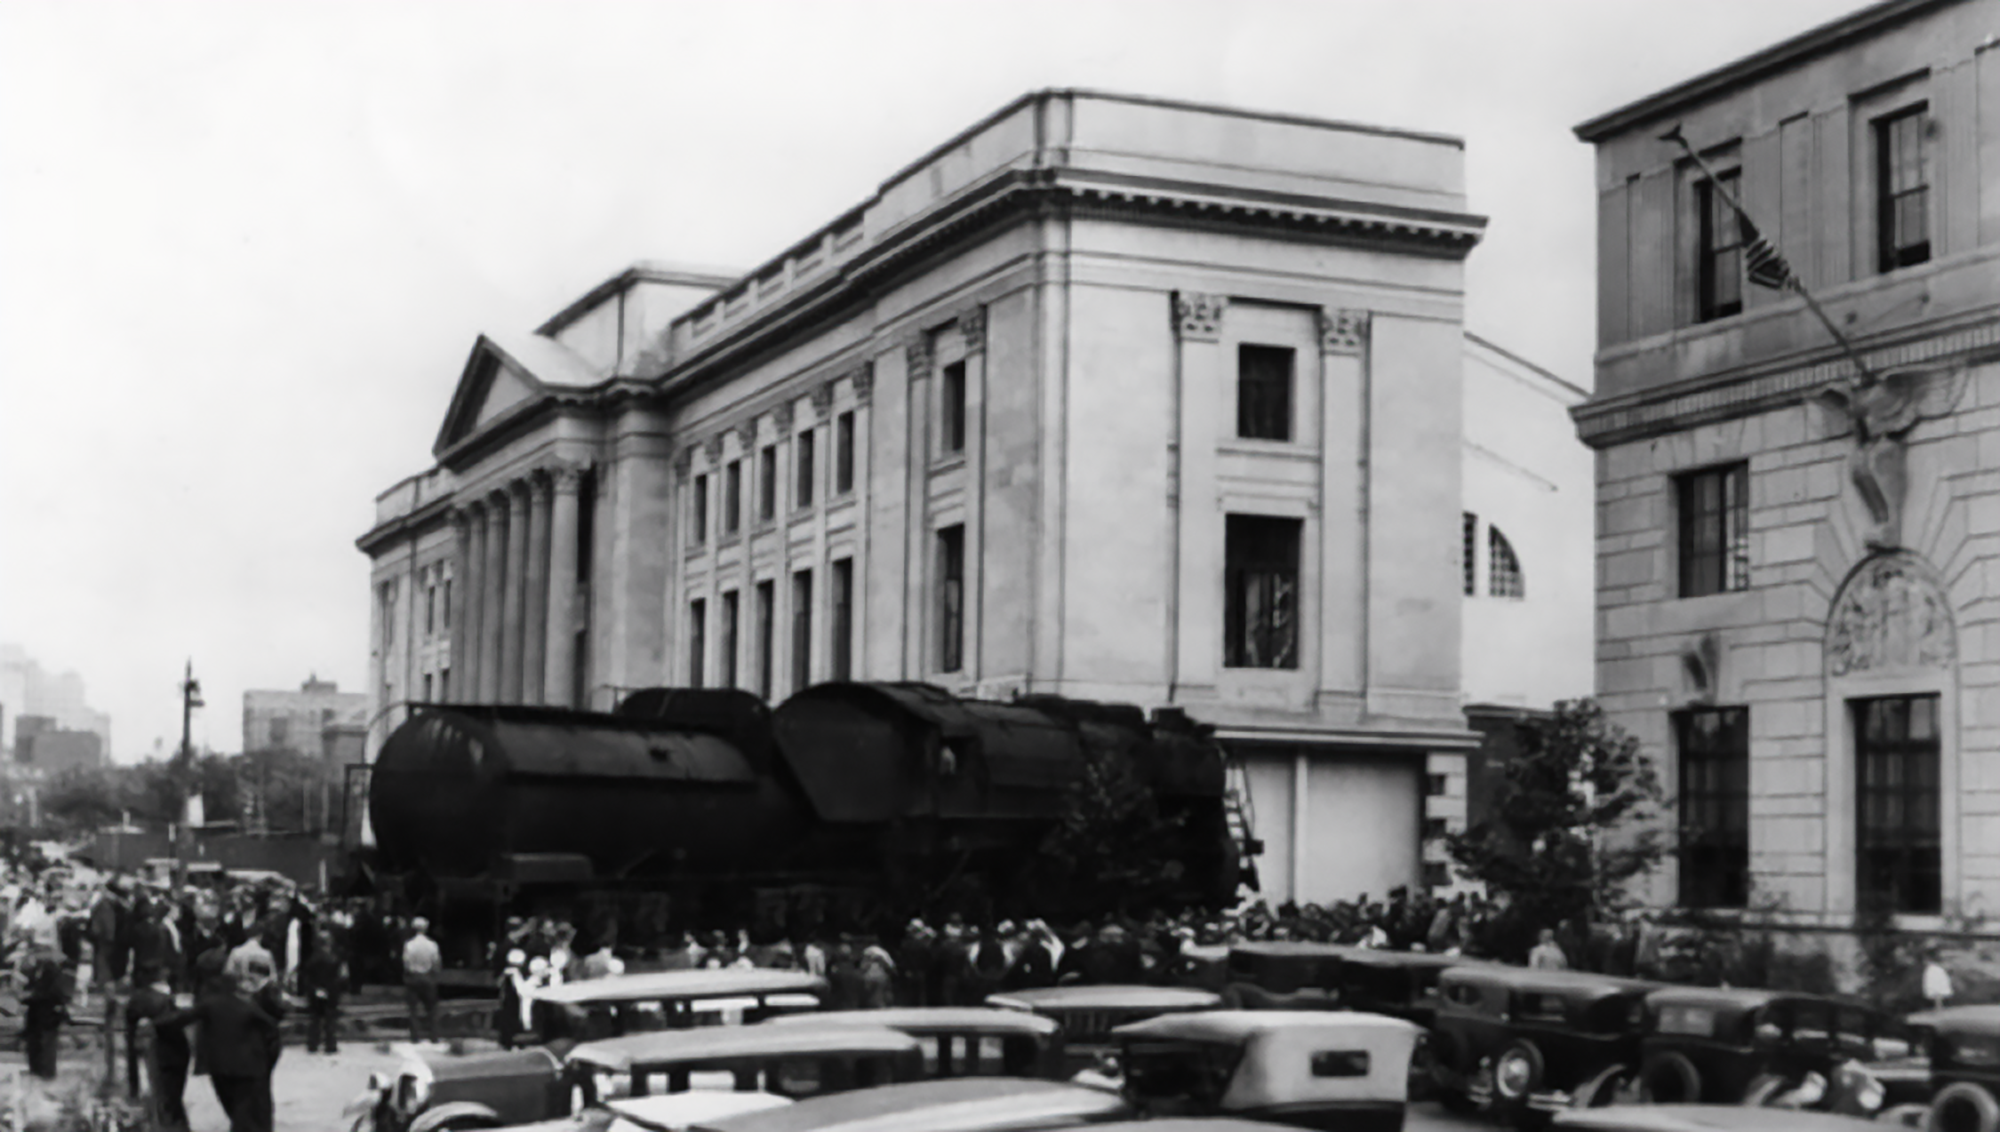 The Baldwin 60000 Locomotive arrives at The Franklin Institute in 1933